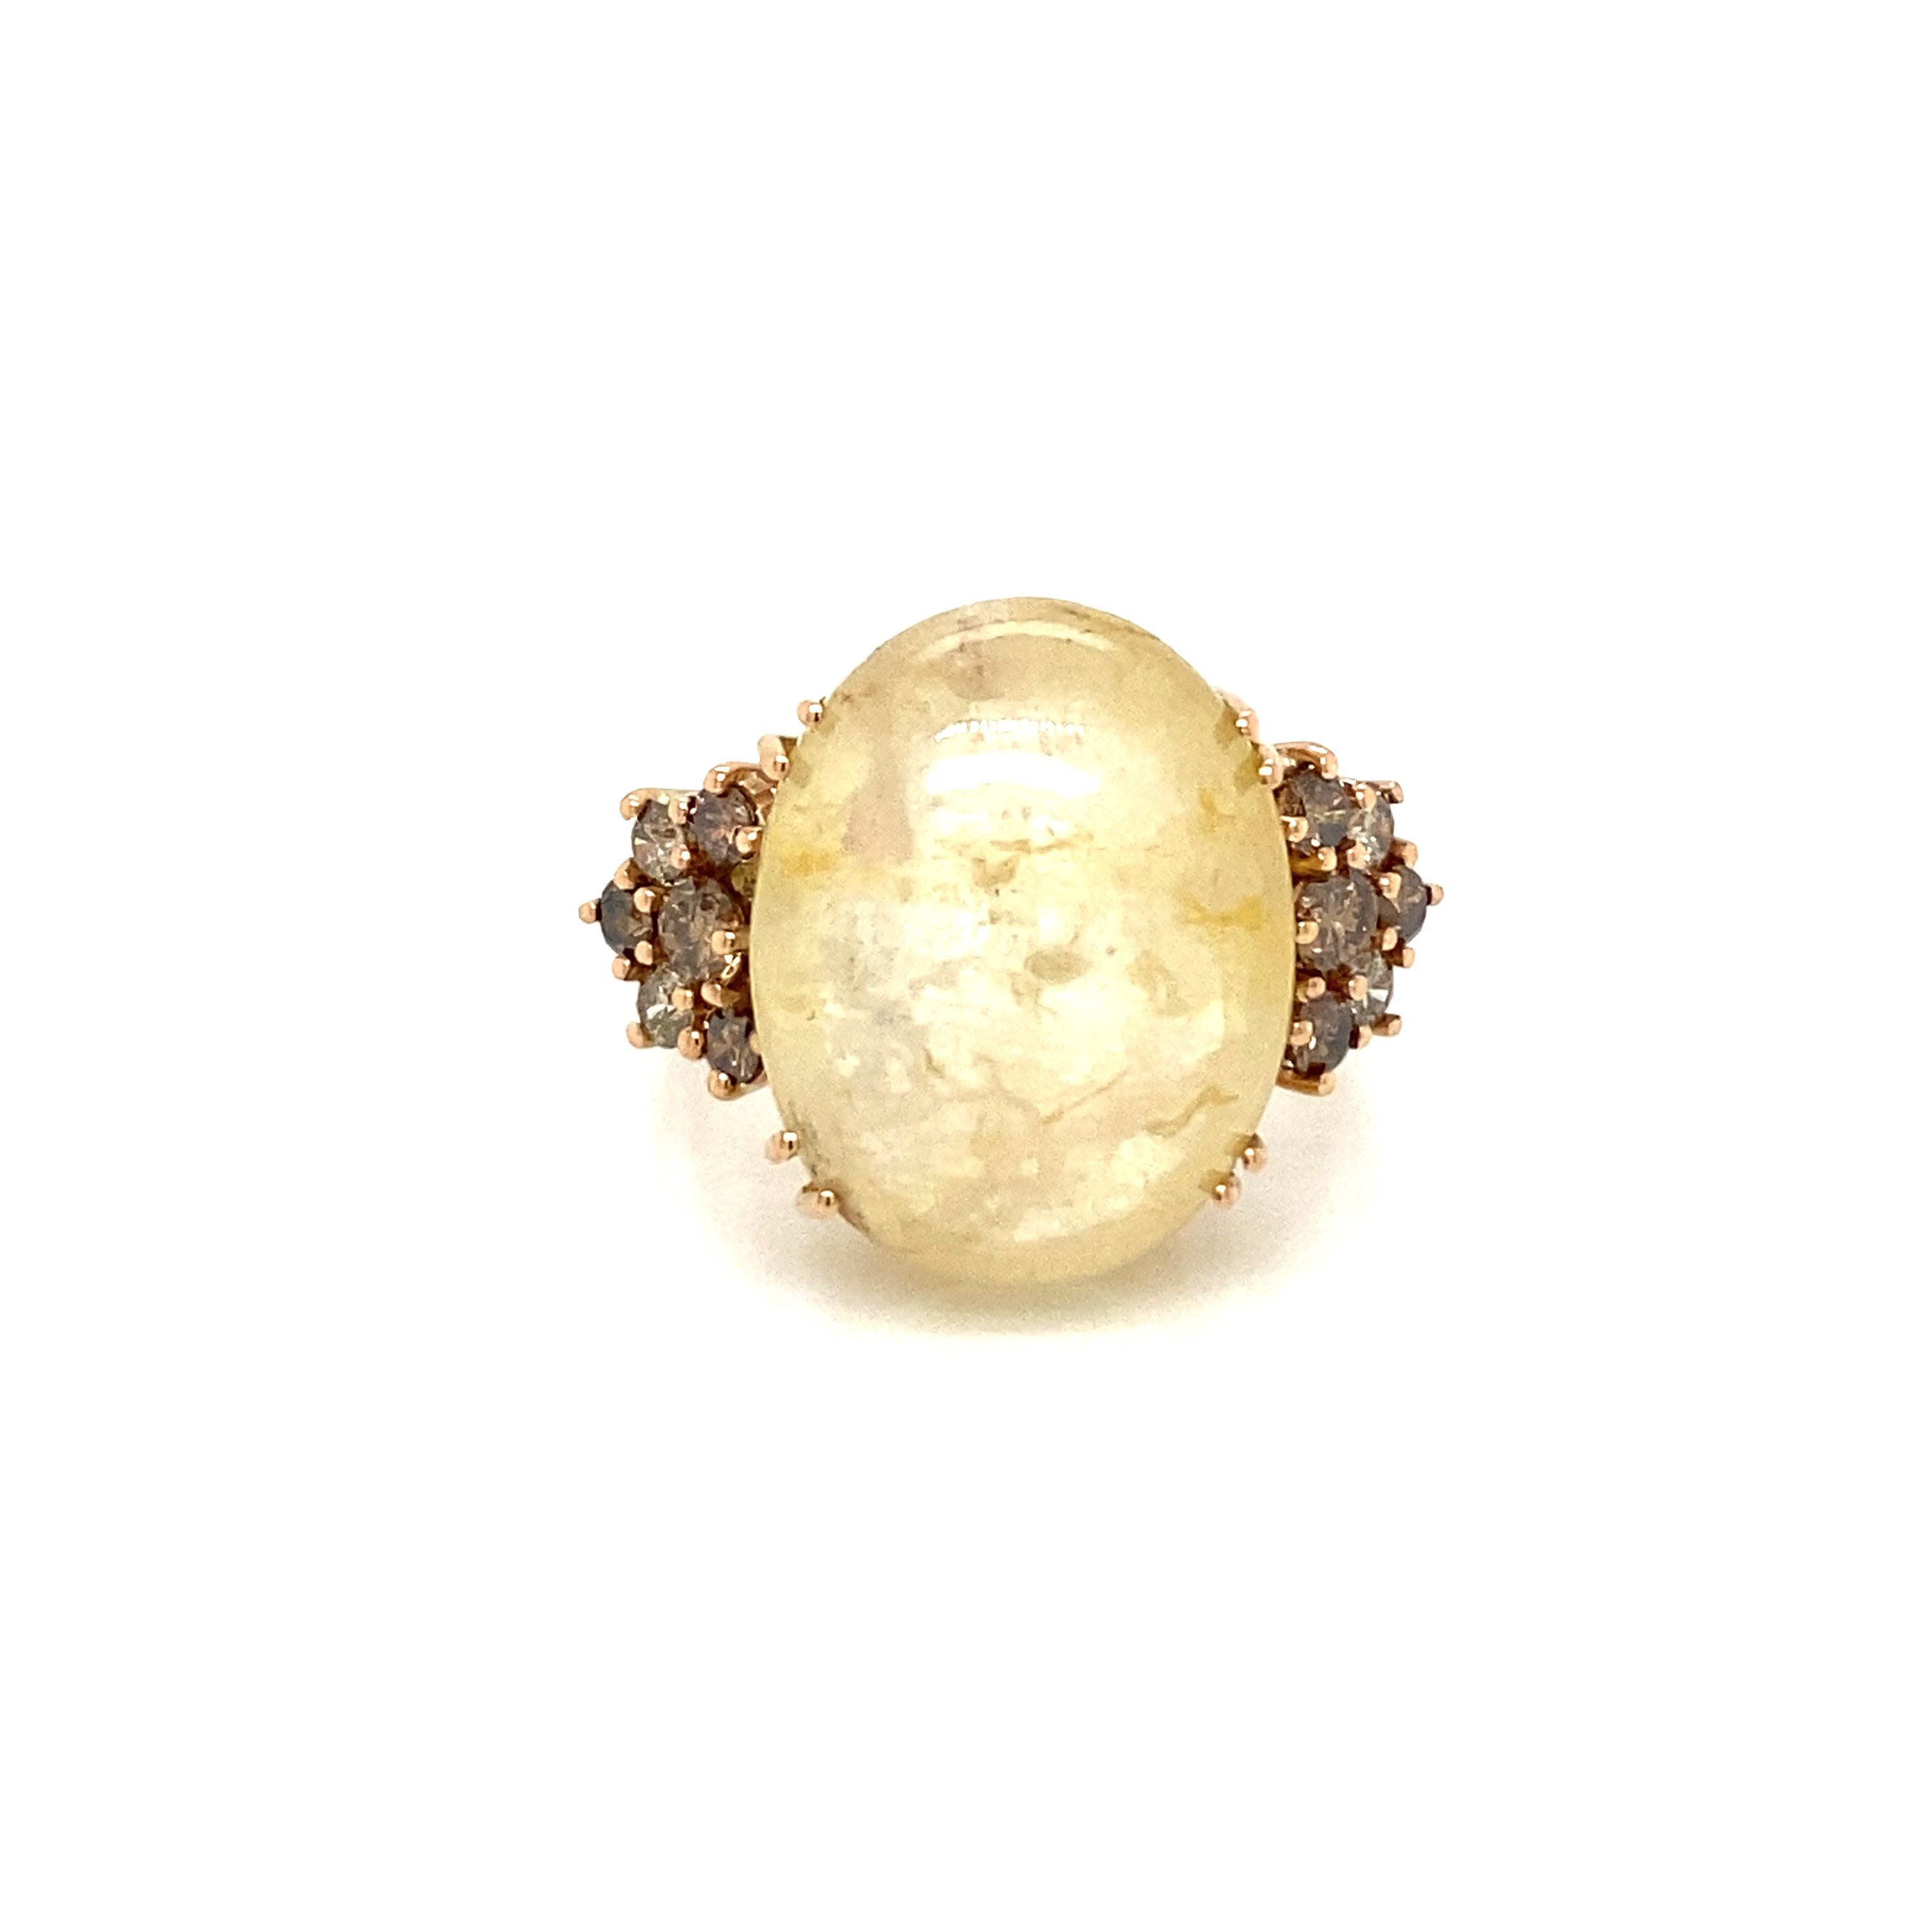 Unusual handmade 18k rose gold cocktail ring. It is set with one large Natural Sapphire cabochon shaped in the center, weight 32 carat, and surrounded by brown and white round Brilliant cut Diamonds, total weight 1 carat.

CONDITION: Pre Owned -